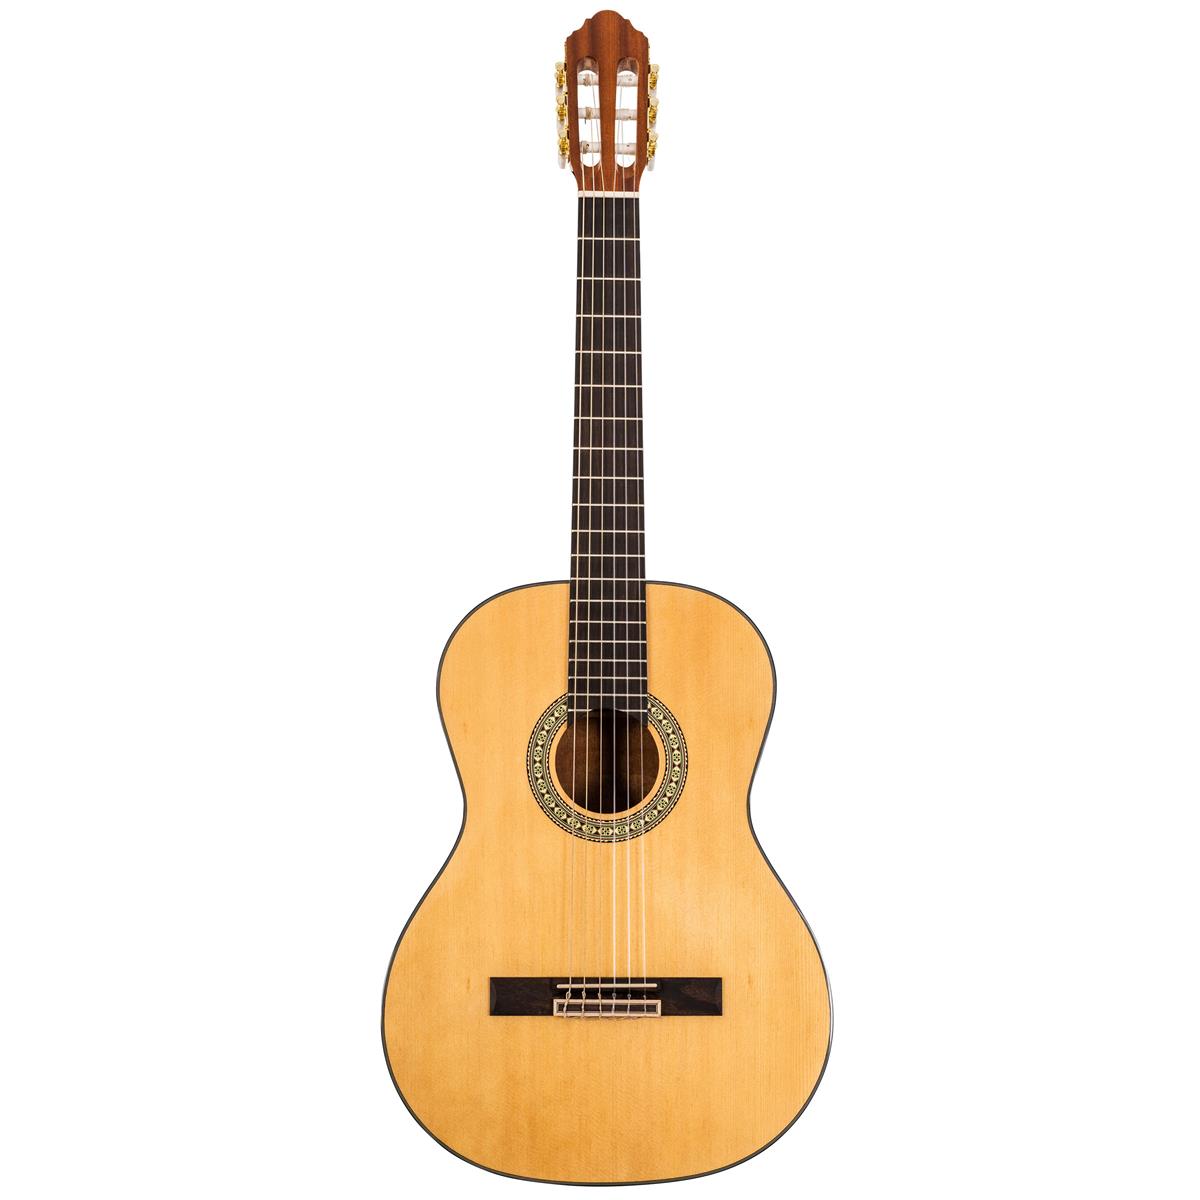 Peavey Delta Woods CNS-1 Classical Nylon String Acoustic Guitar -  03620310